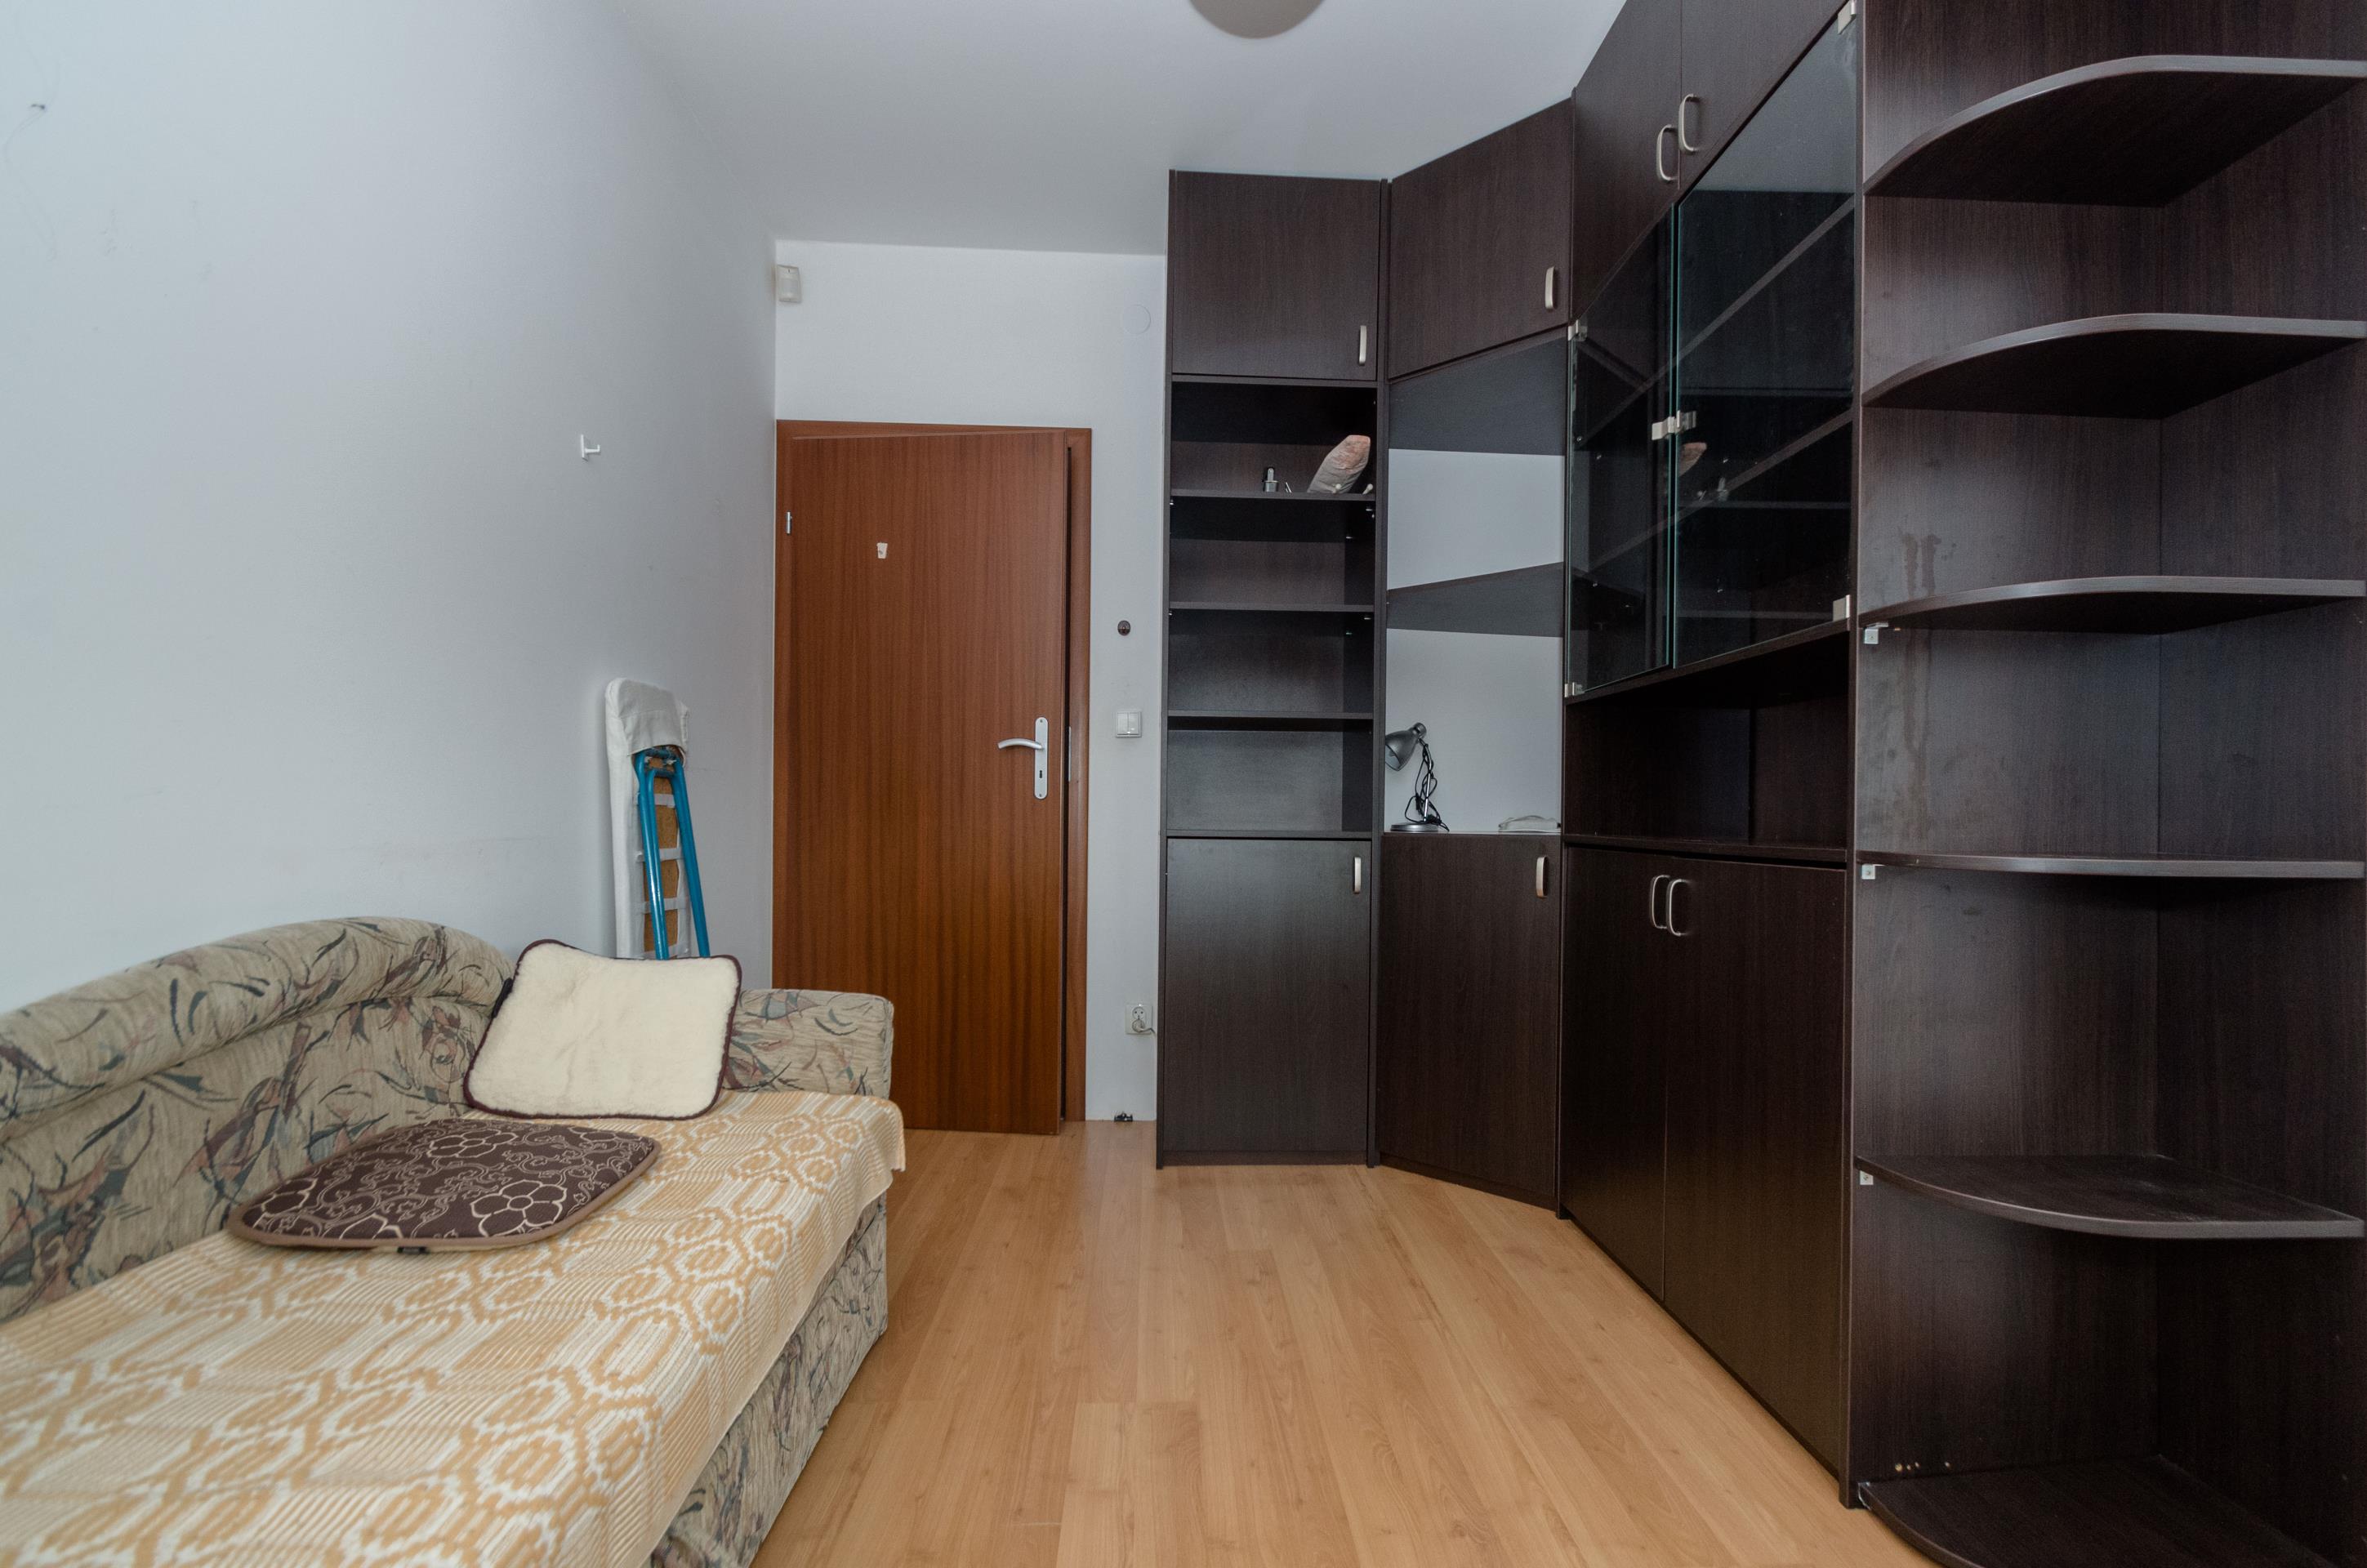 2 bedrooms apartment for rent